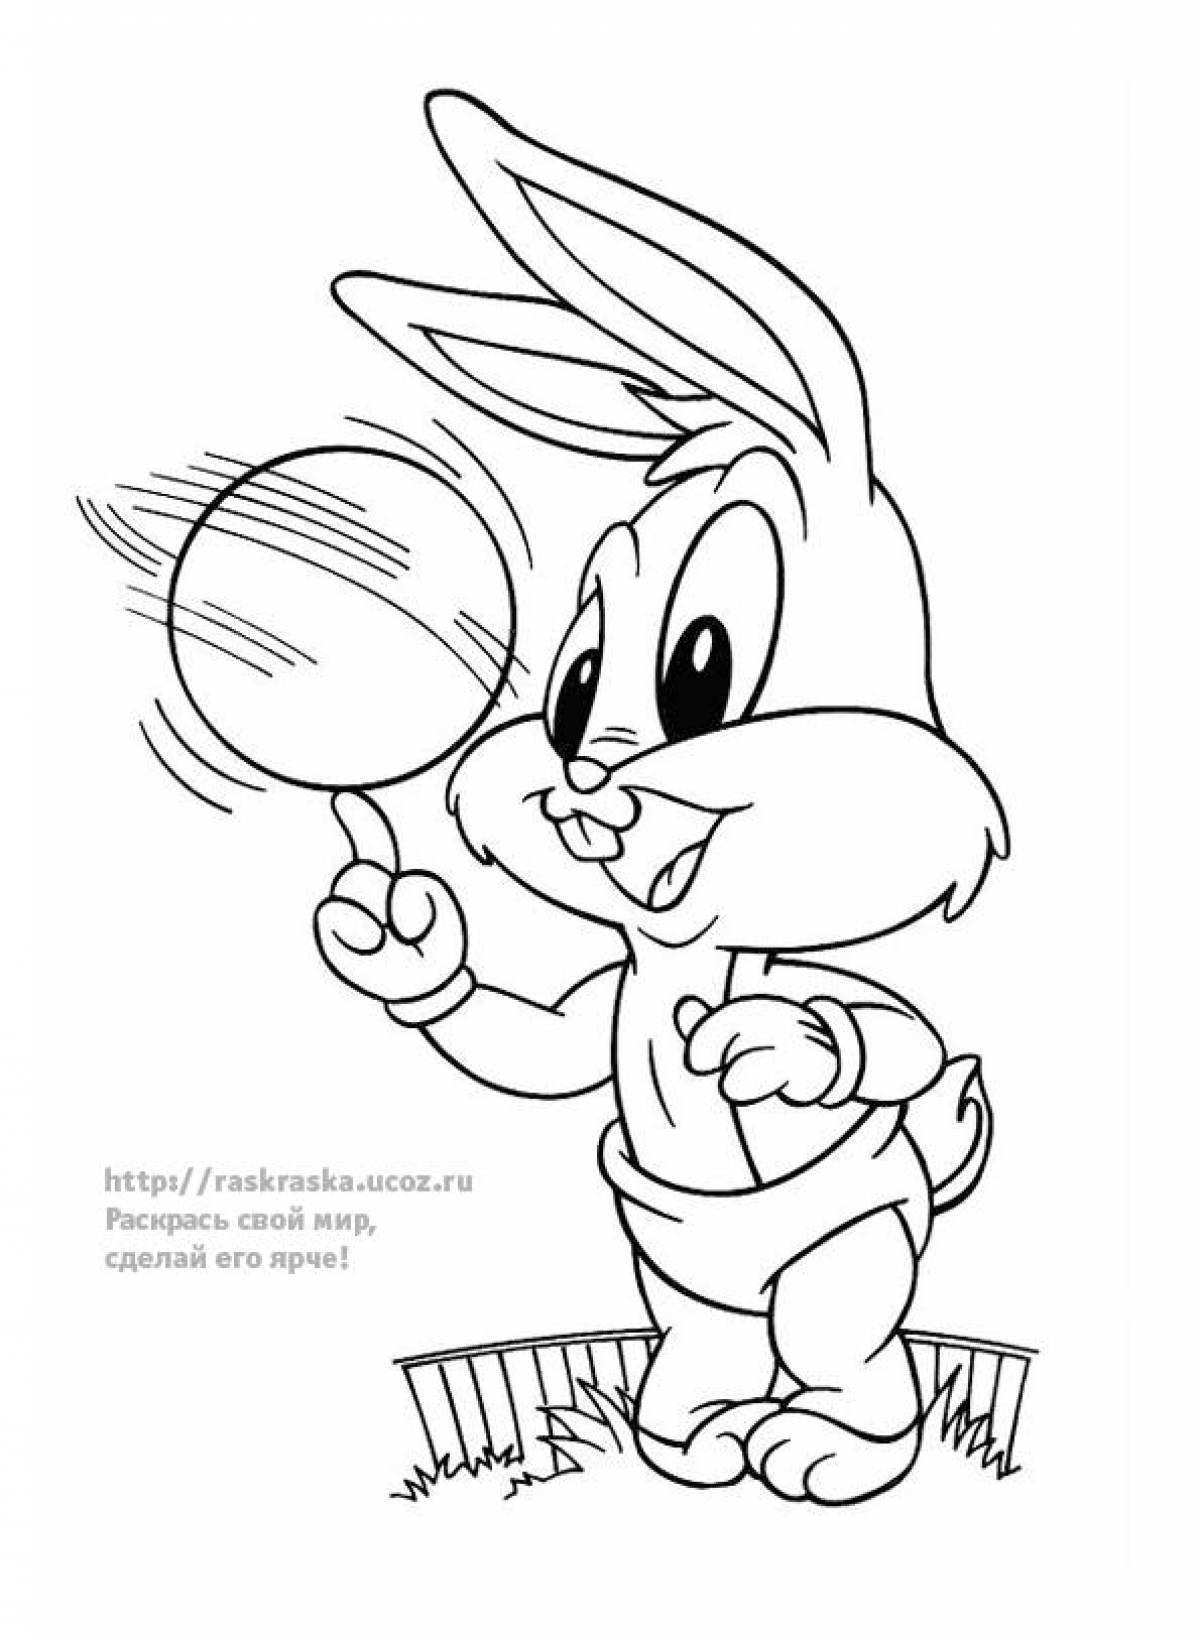 Cute bunny coloring game